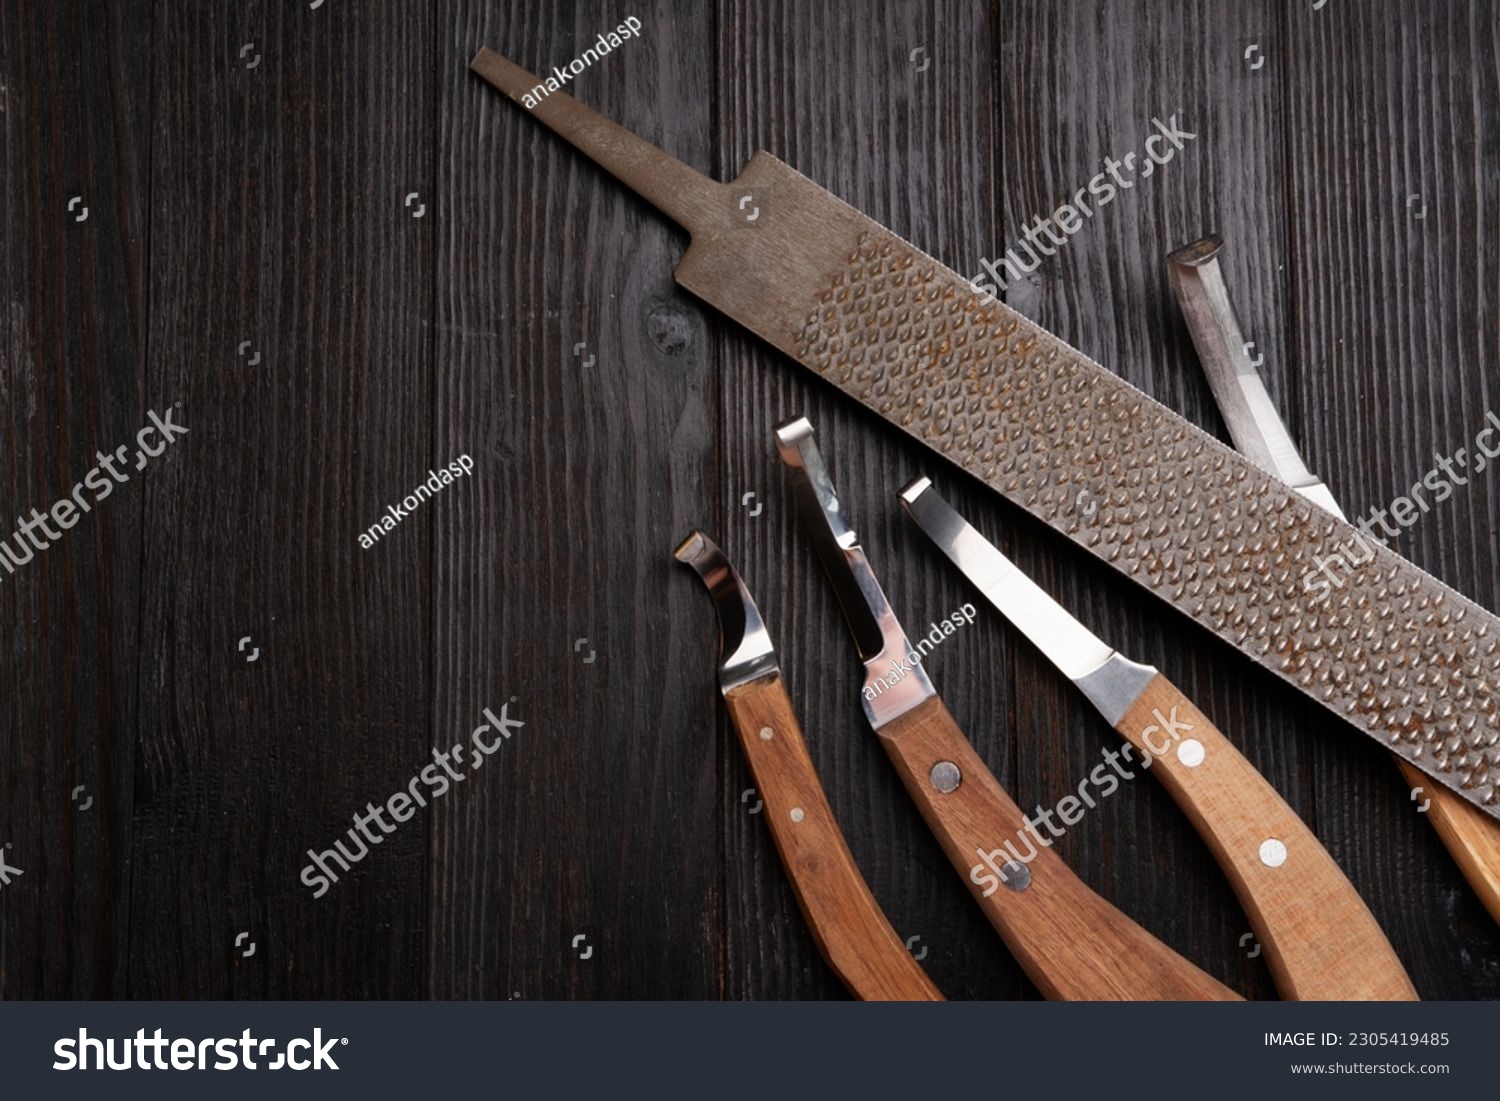 new professional hoof knives with  rasp for trimming horsy foot against black wooden background. horse hoof care concept #2305419485